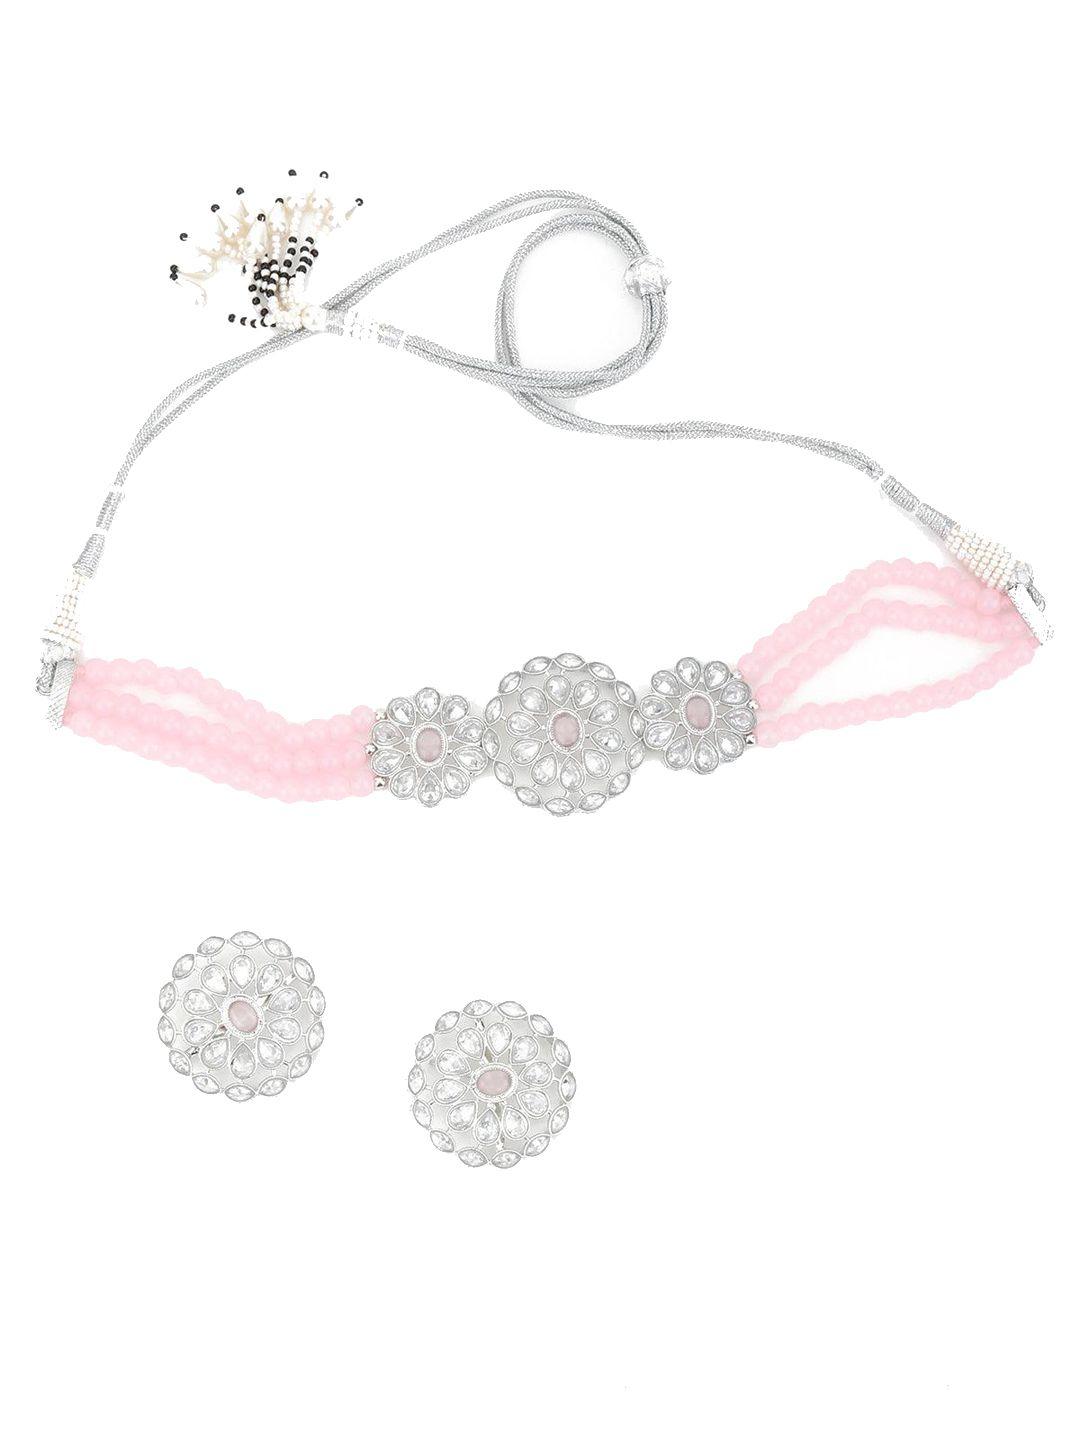 odette silver-plated stone-studded & beaded choker with earrings